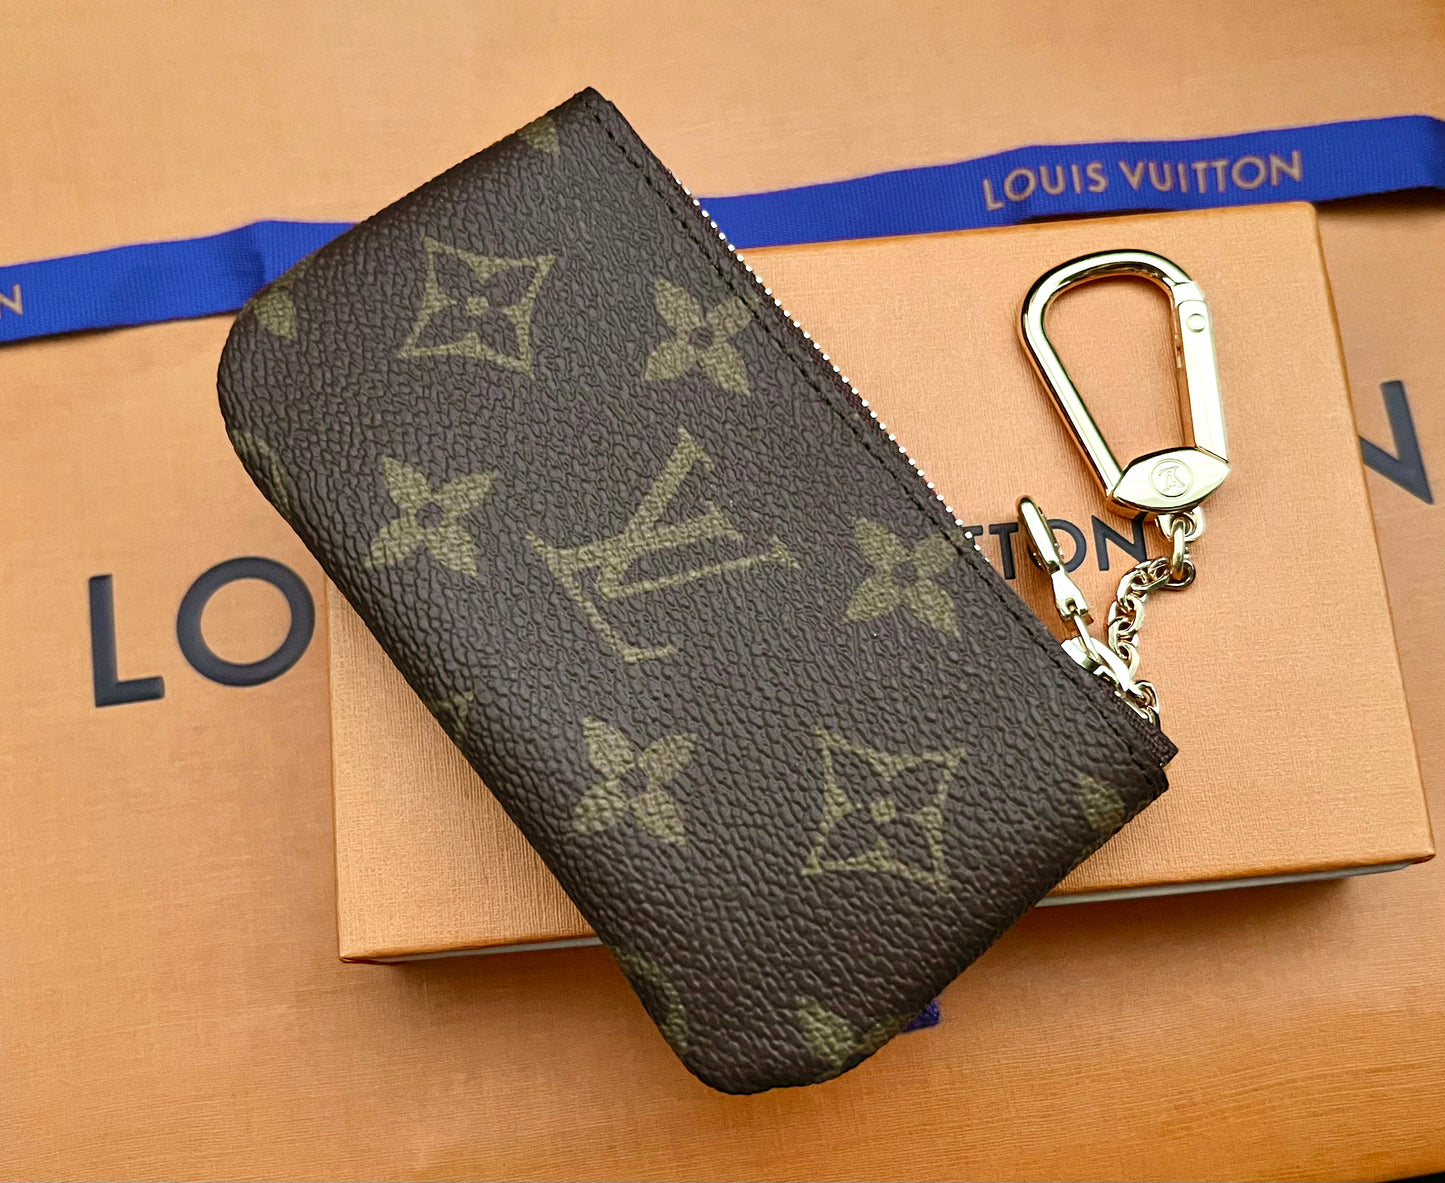 LATEST RELEASE FROM LOUIS VUITTON/HOLIDAY ANIMATION BAG & KEY